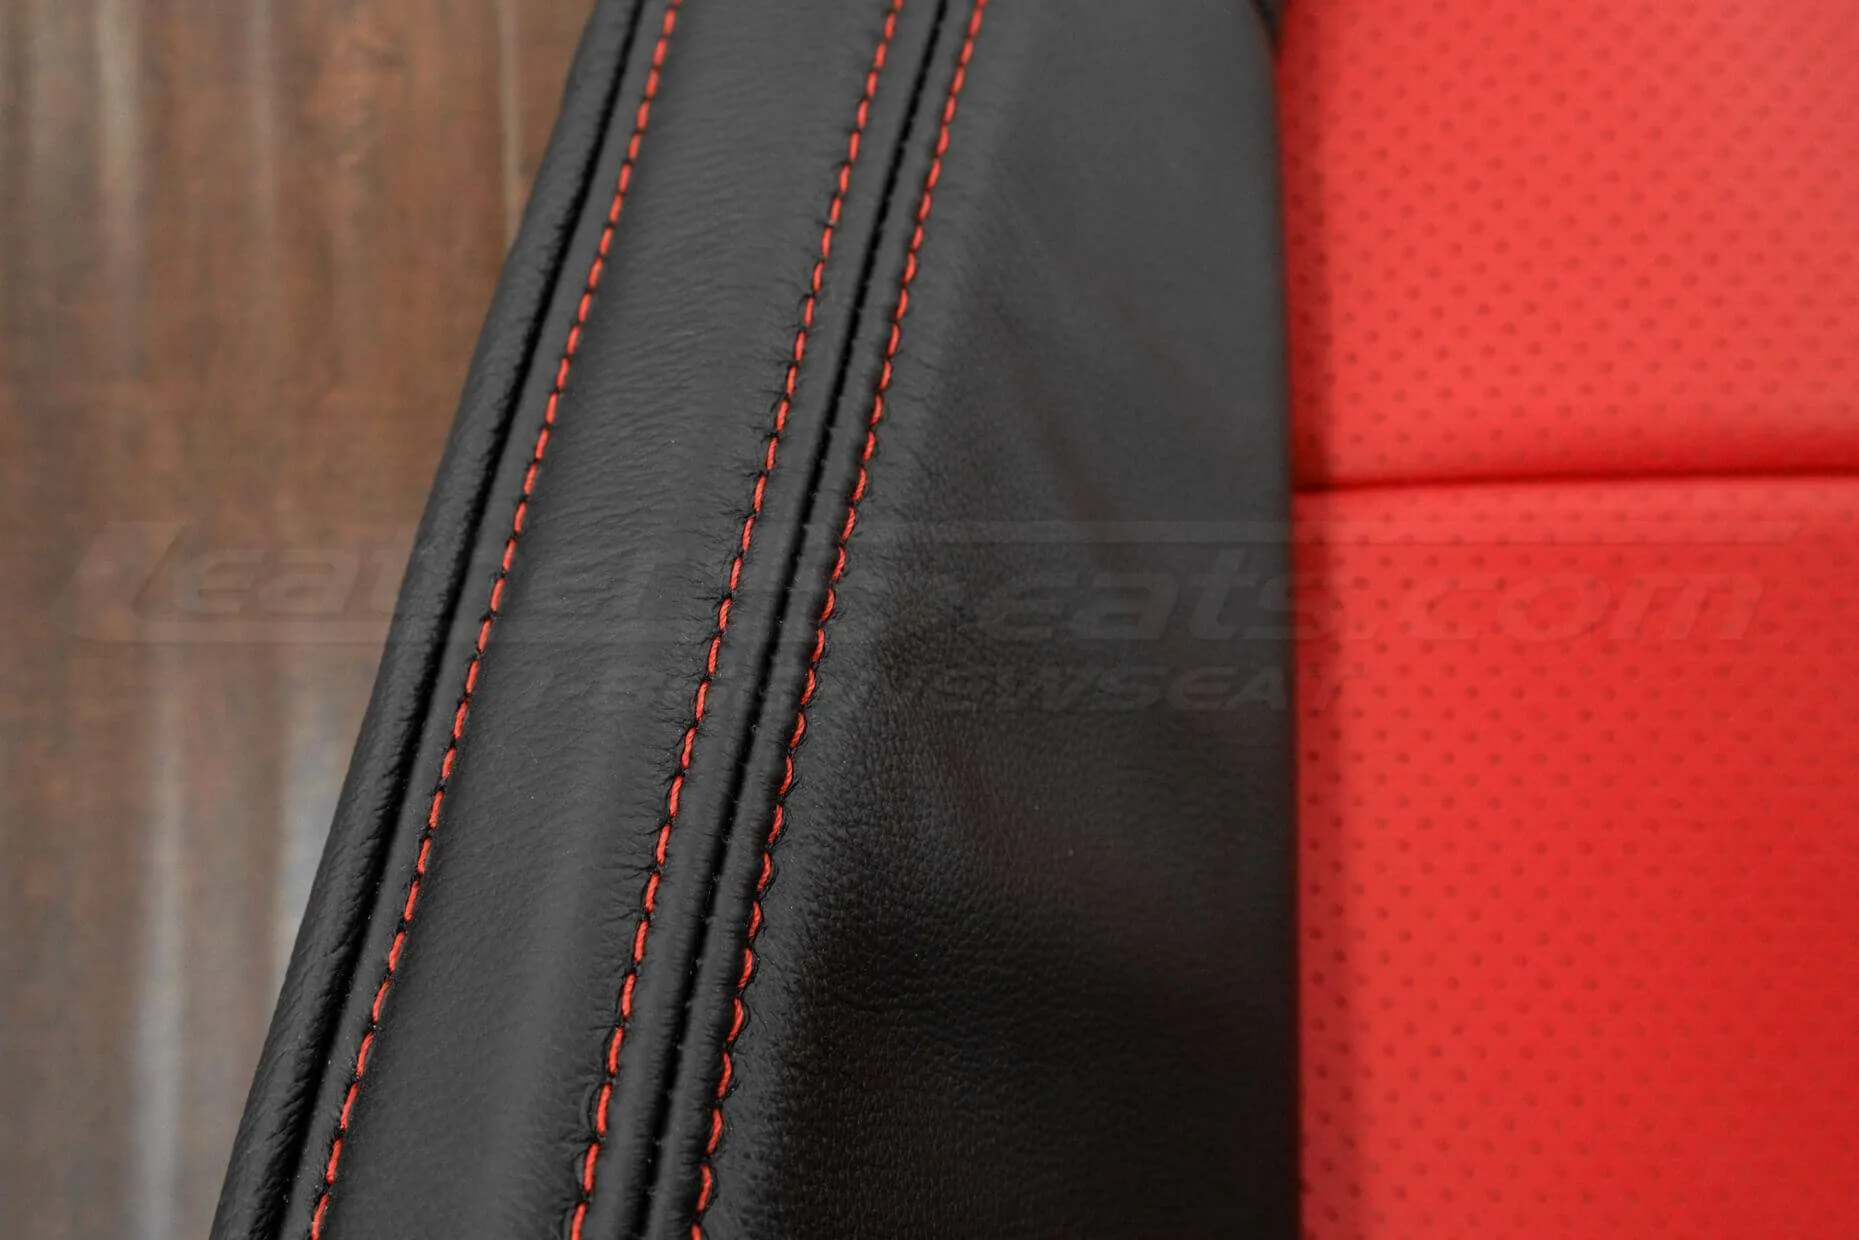 05-13 Chevrolet Corvette Upholstery Kit - Black & Bright Red - Side double- stitching in bright red